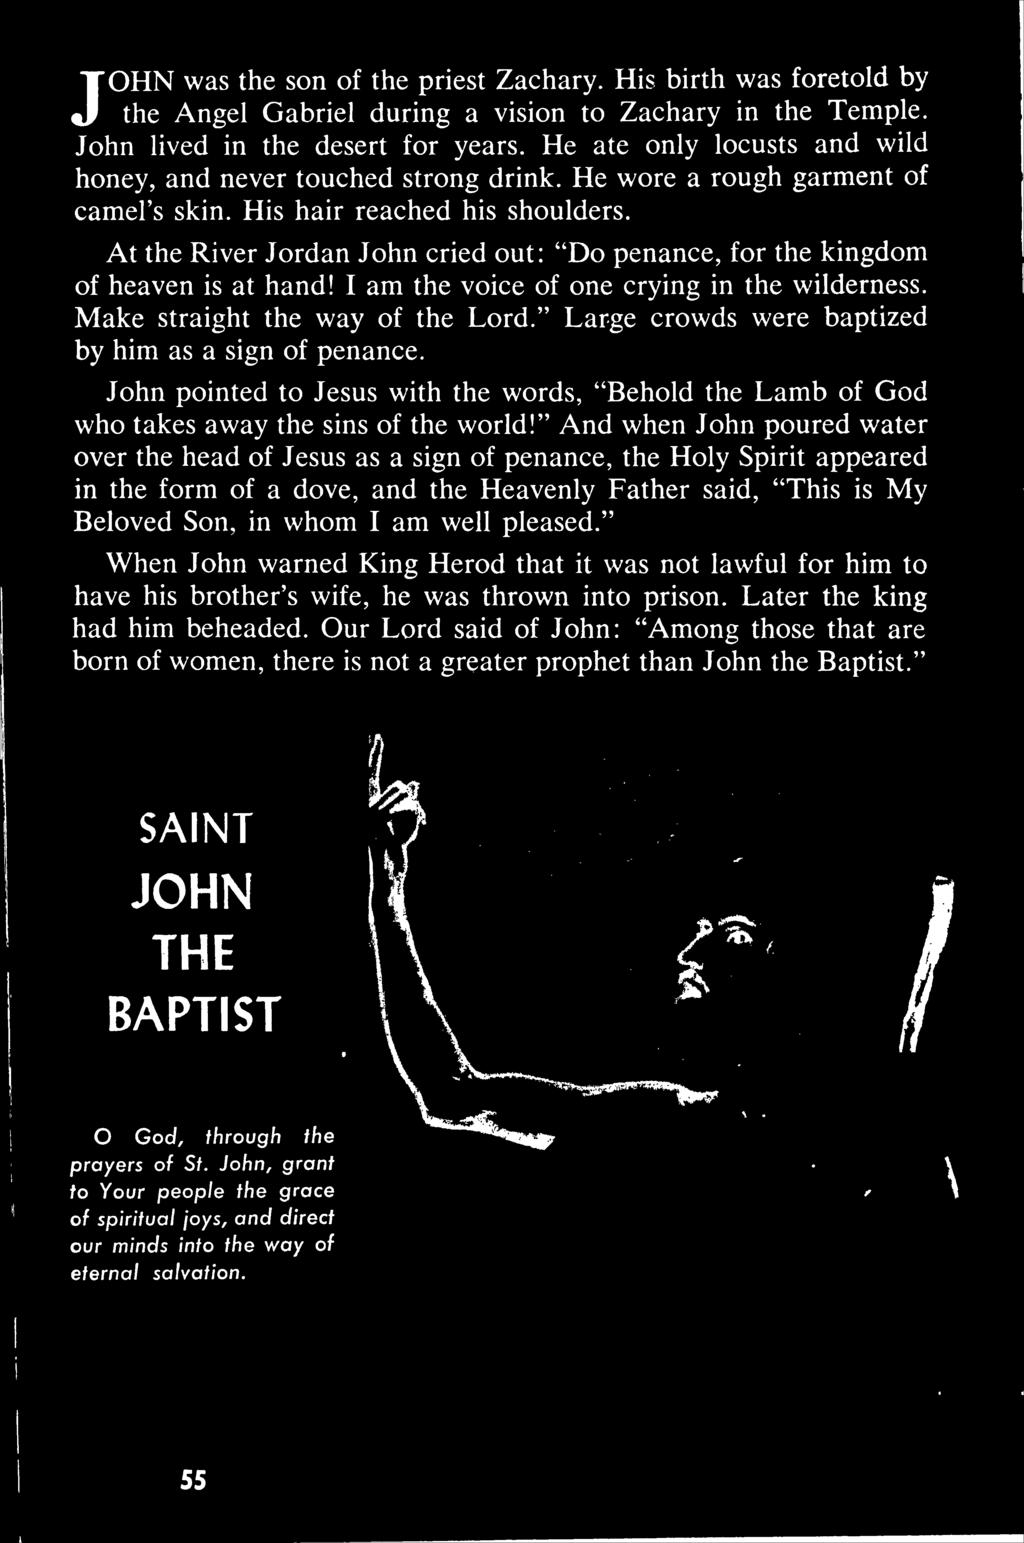 JOHN was the son of the priest Zachary. His birth was foretold by the Angel Gabriel during a vision to Zachary in the Temple. John lived in the desert for years.